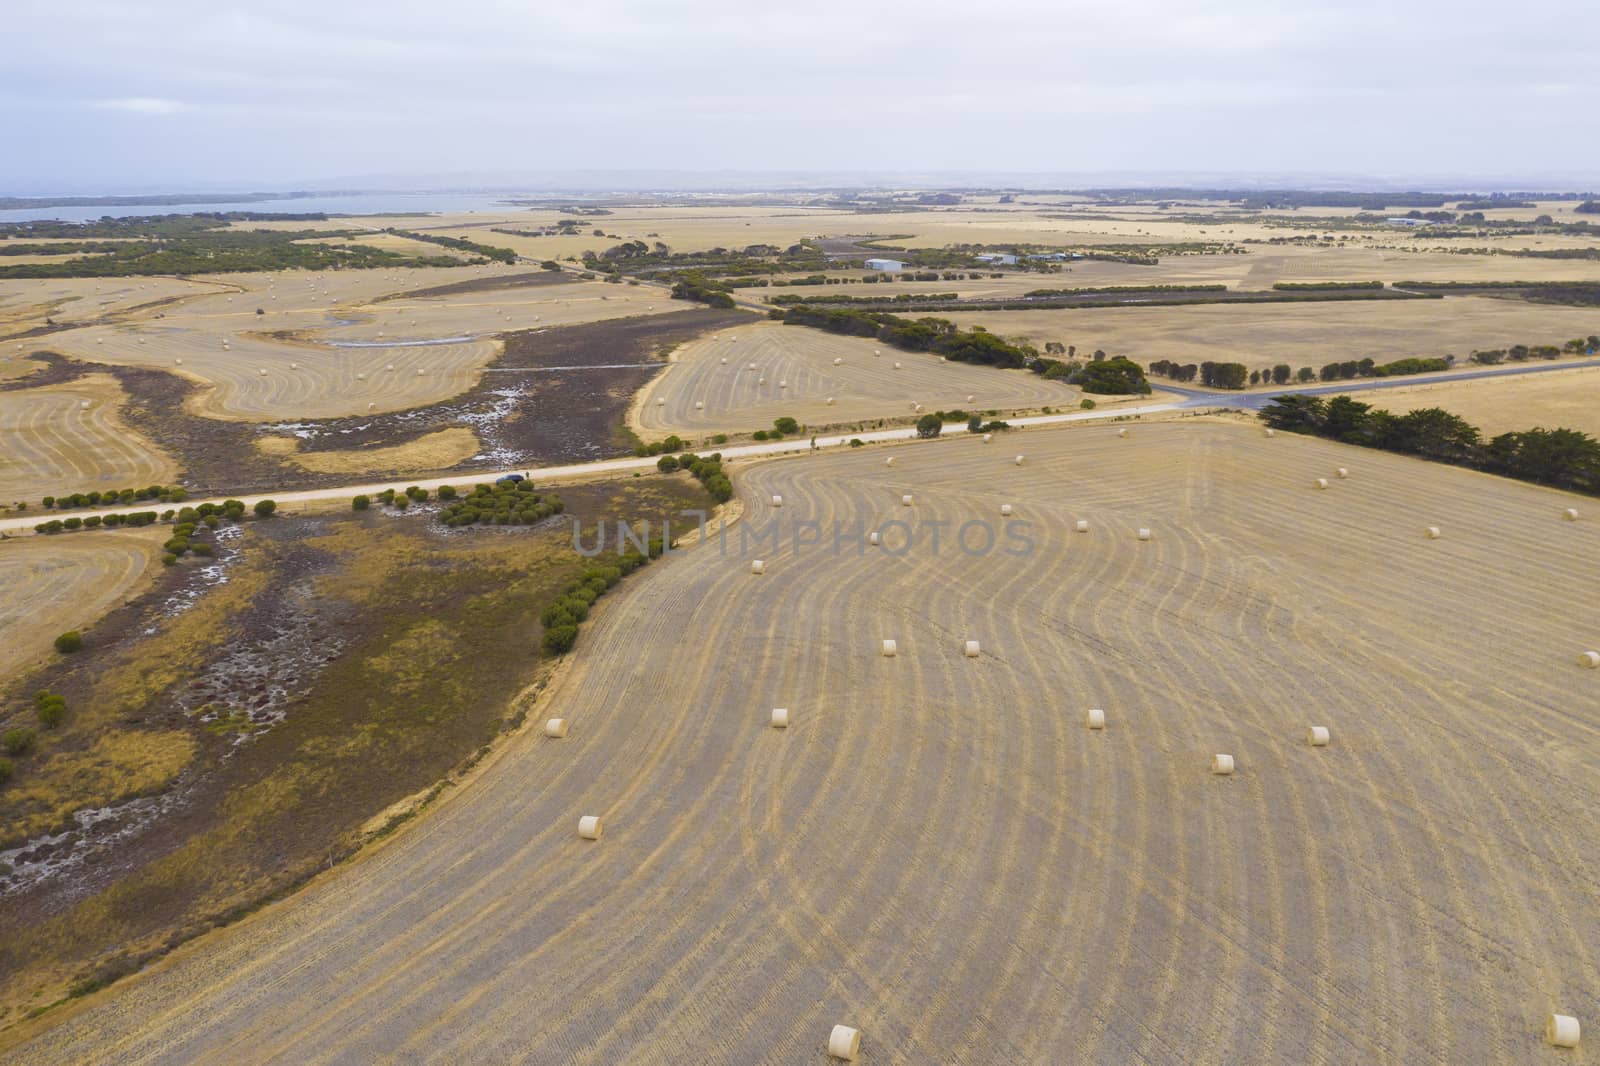 Aerial view of rolled hay bales in an agricultural field in regional Australia